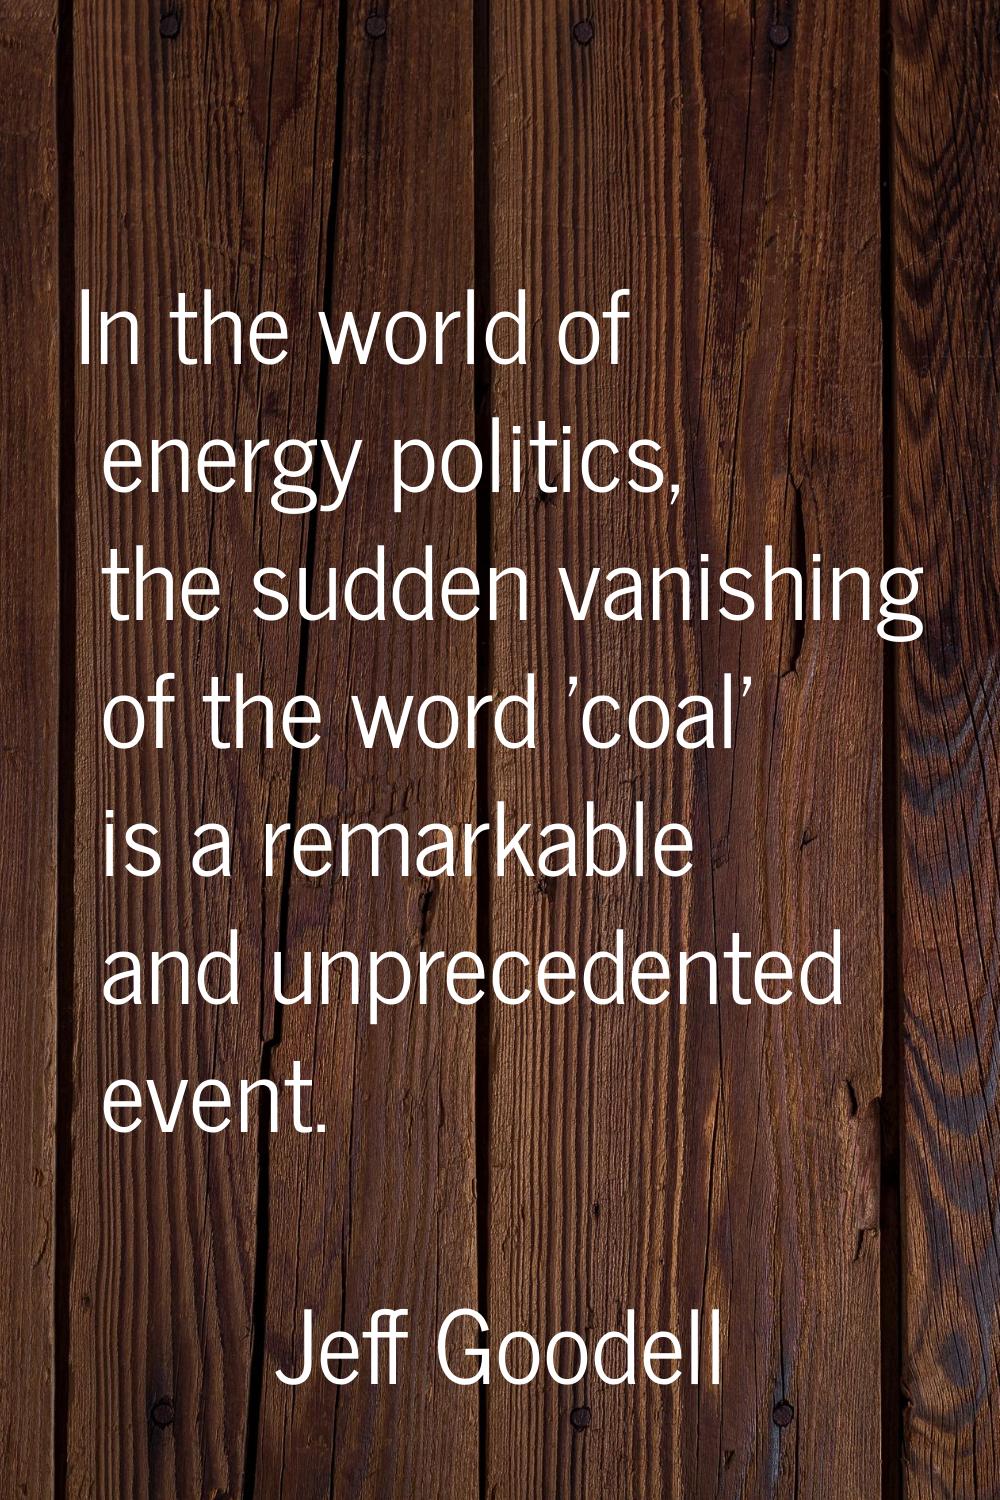 In the world of energy politics, the sudden vanishing of the word 'coal' is a remarkable and unprec